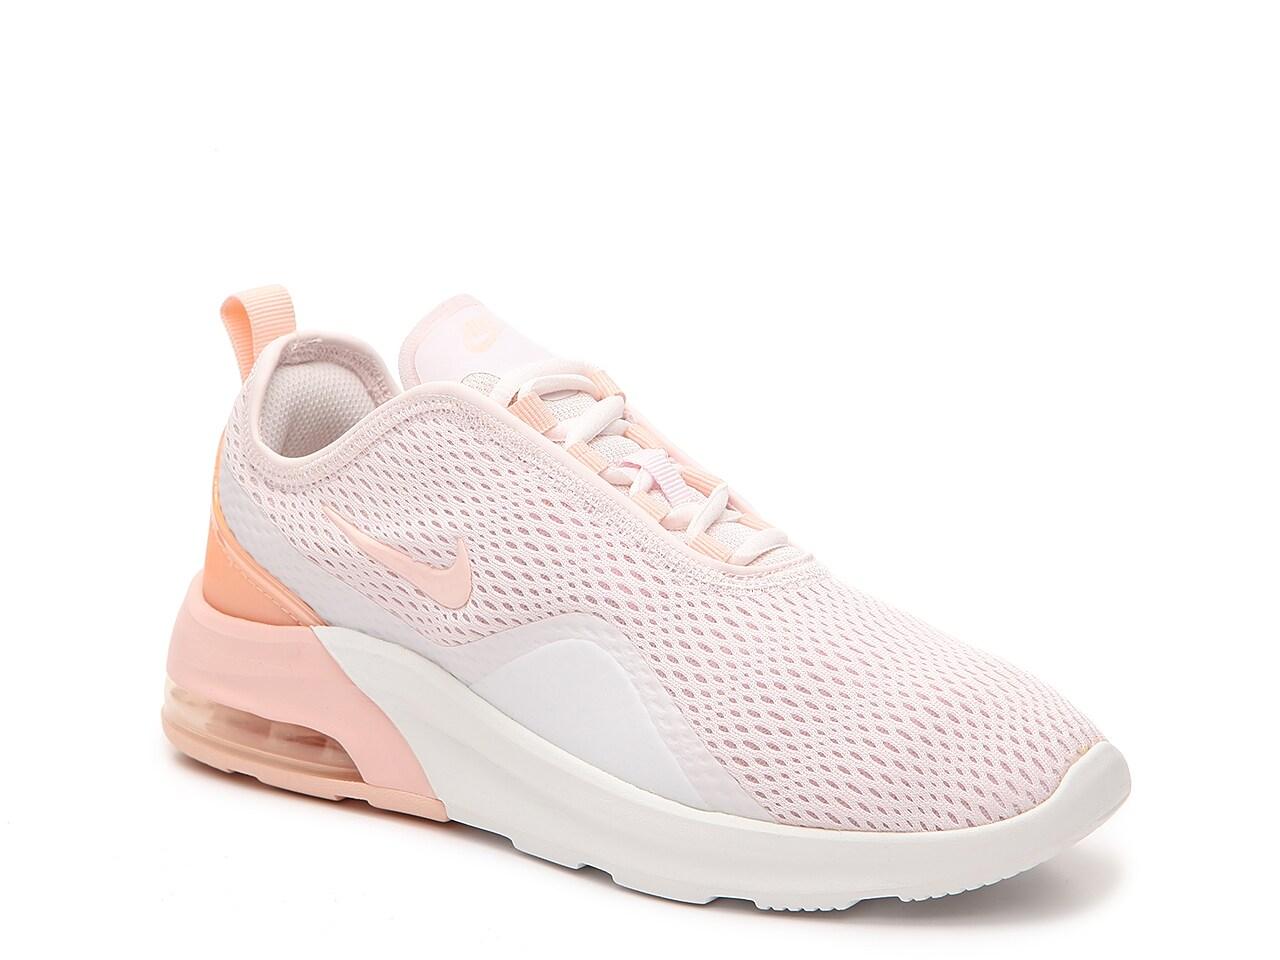 Nike Synthetic Air Max Motion 2 Sneaker in Pale Pink/White (Pink) | Lyst